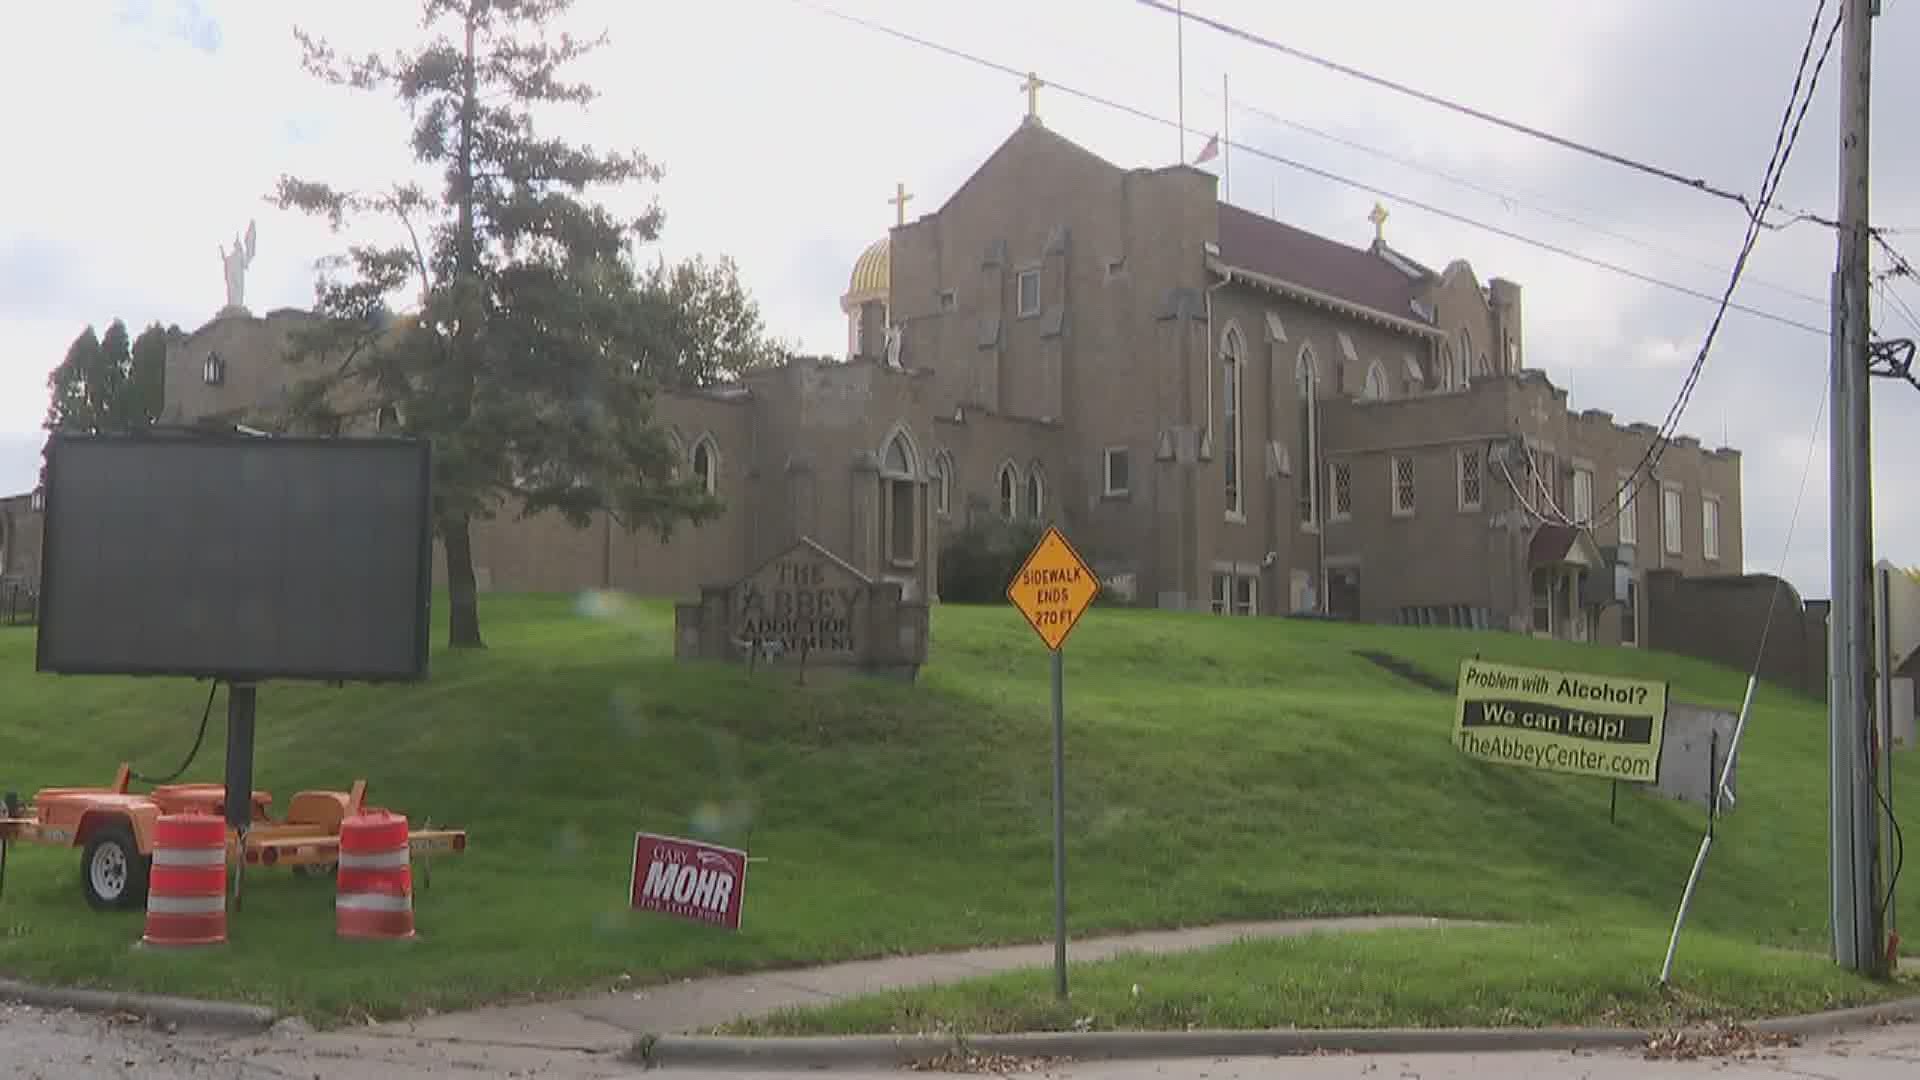 'This is an essential program': why the Abbey Addiction Treatment Center says staying open is crucial